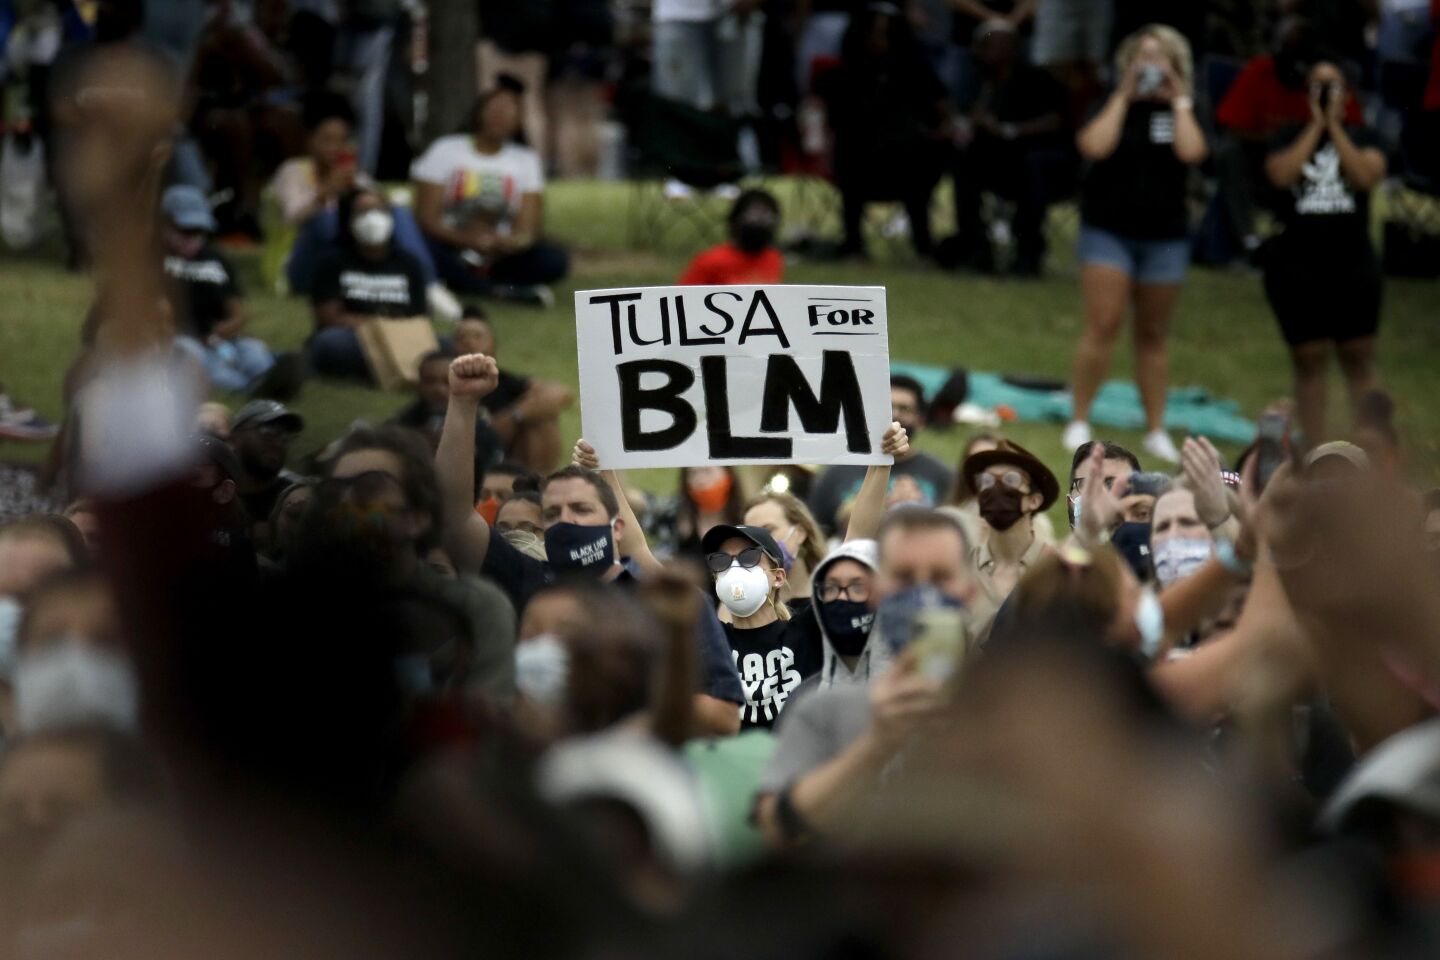 A woman holds up a sign as she listens to the Rev. Al Sharpton address the crowd at a Juneteenth rally in Tulsa, Okla., Friday.